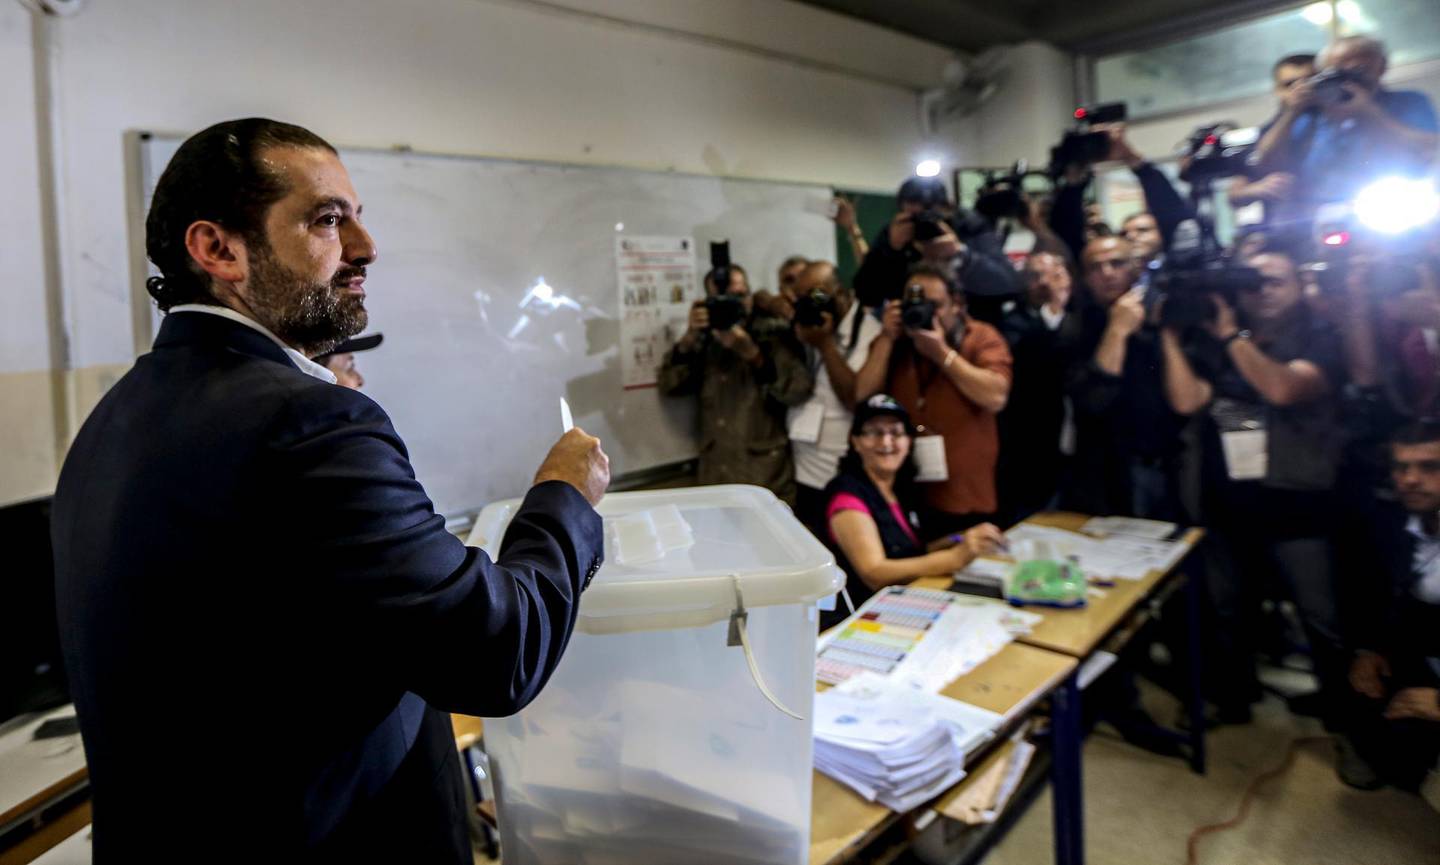 epa06715540 Lebanese Prime minister Saad Hariri casts his ballot at a ballot station in Baabda, south east Beirut, Lebanon, 06 May 2018. There are 976 candidates, including 111 women, competing for 128 seats in parliament divided equally between the Muslim and Christian sects,  during the general parliamentary elections after nine years of forced extension, through a new electoral law that adopts the percentage.  EPA/NABIL MOUNZER